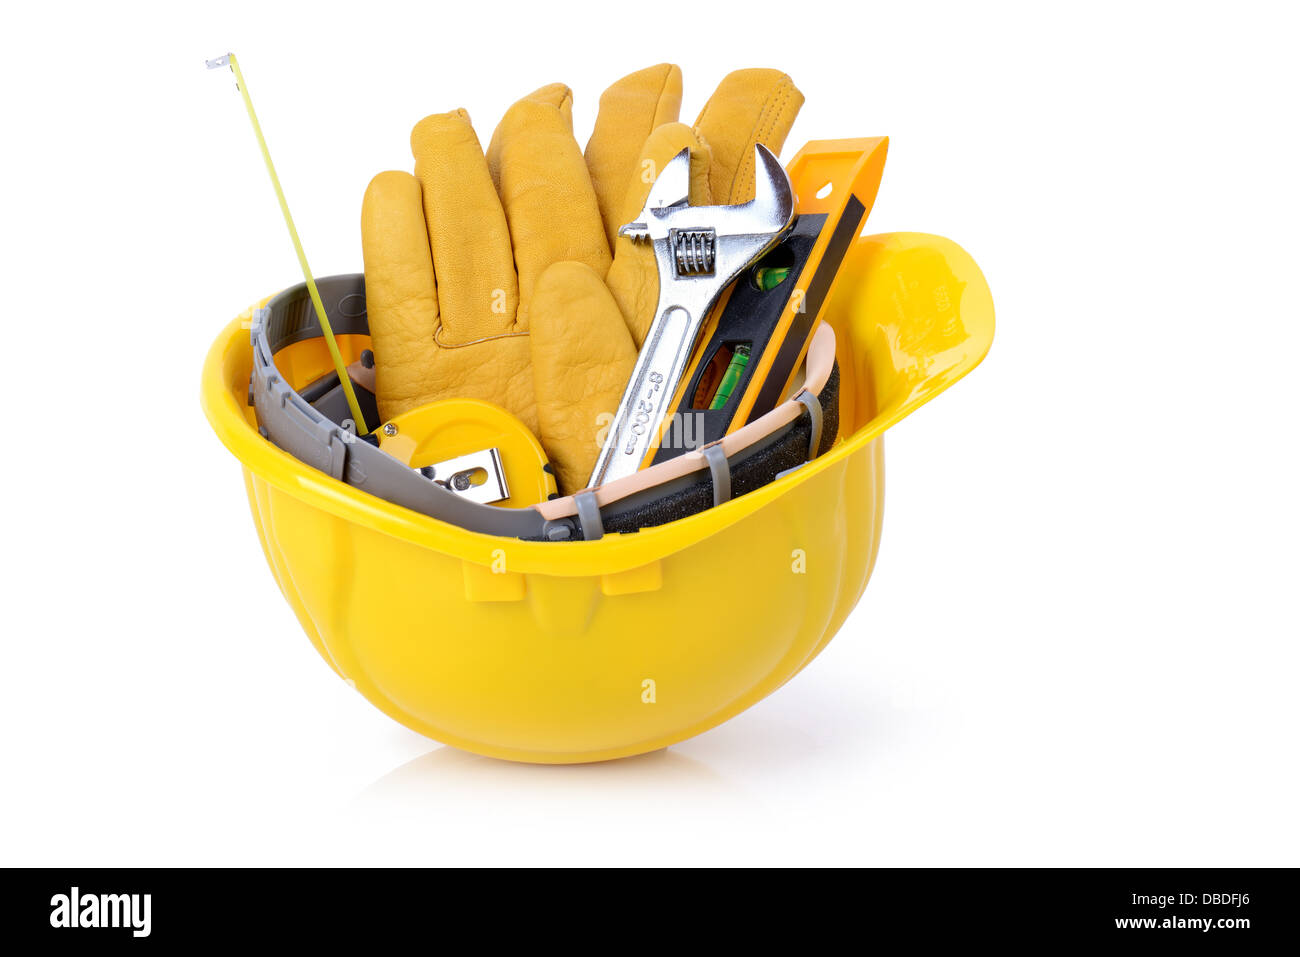 Construction DIY tools ready for work isolated on white background Stock Photo